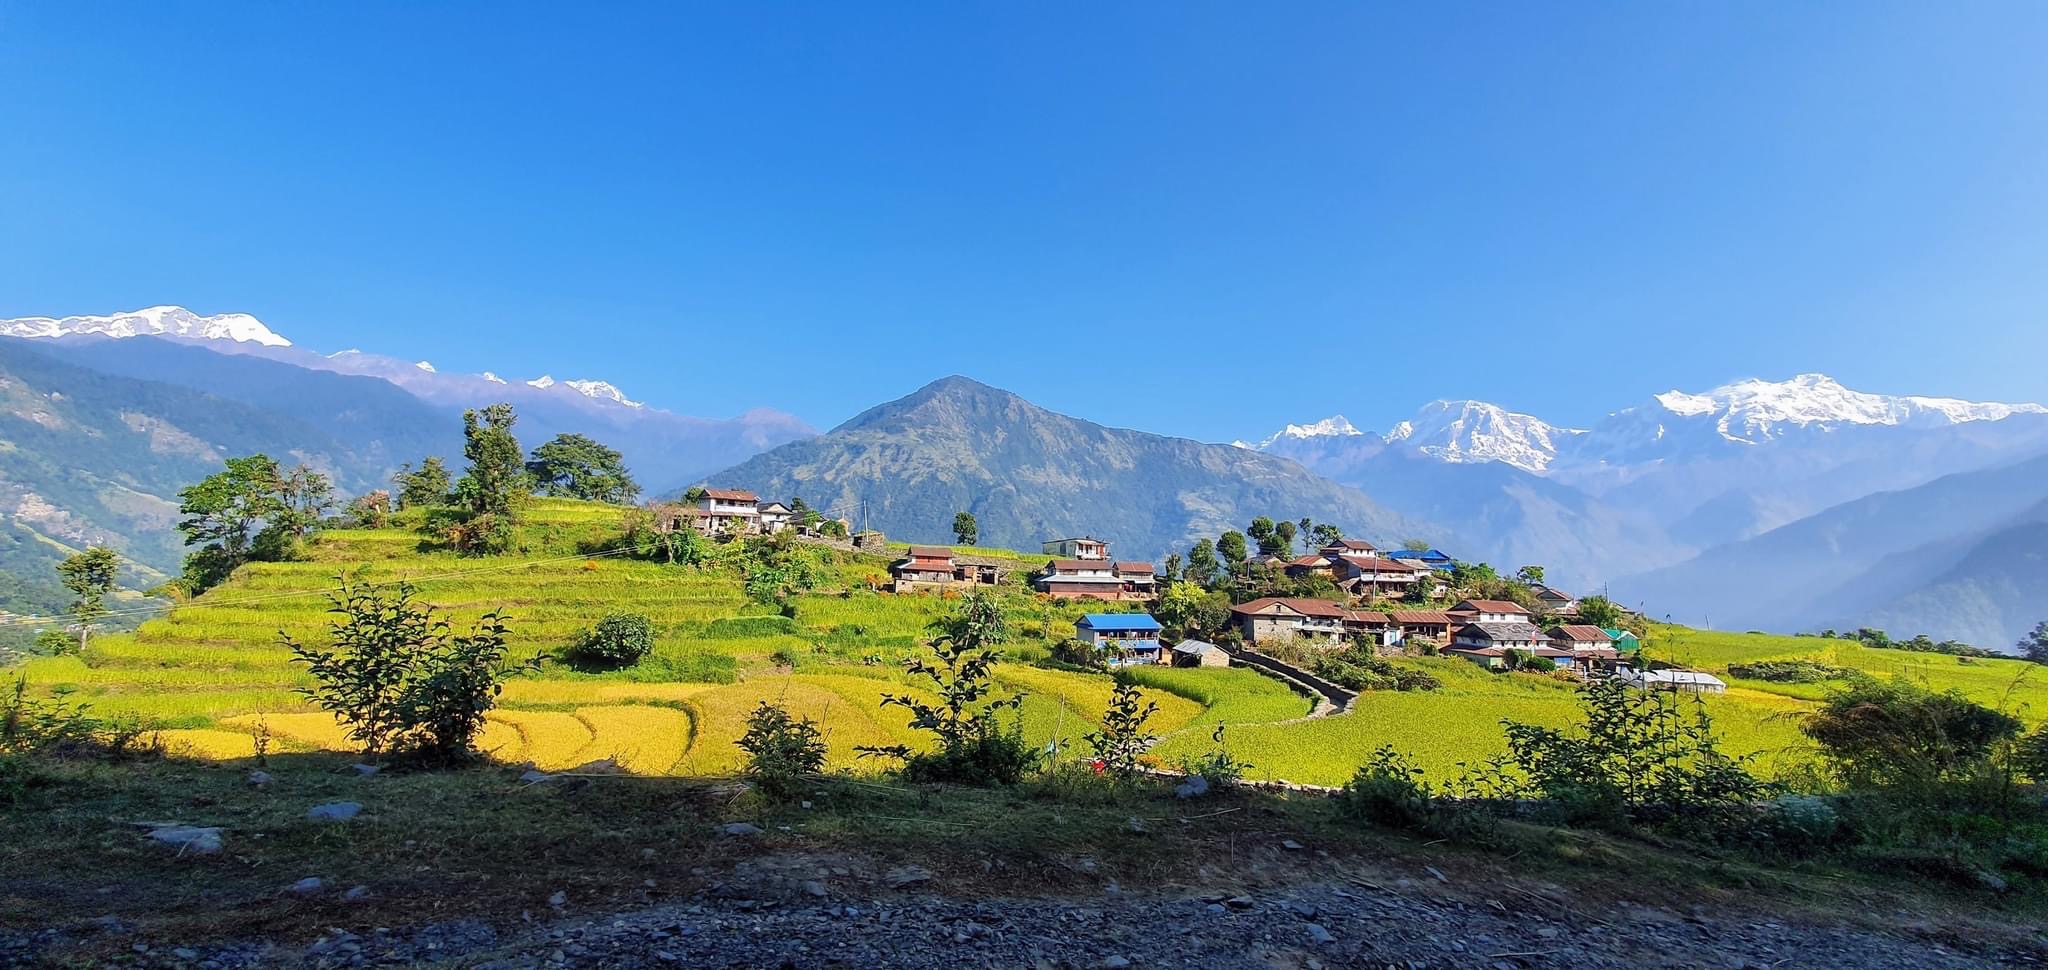 A remote Nepal village surrounded by lush green paddy fields, and snow capped mountains in the distance